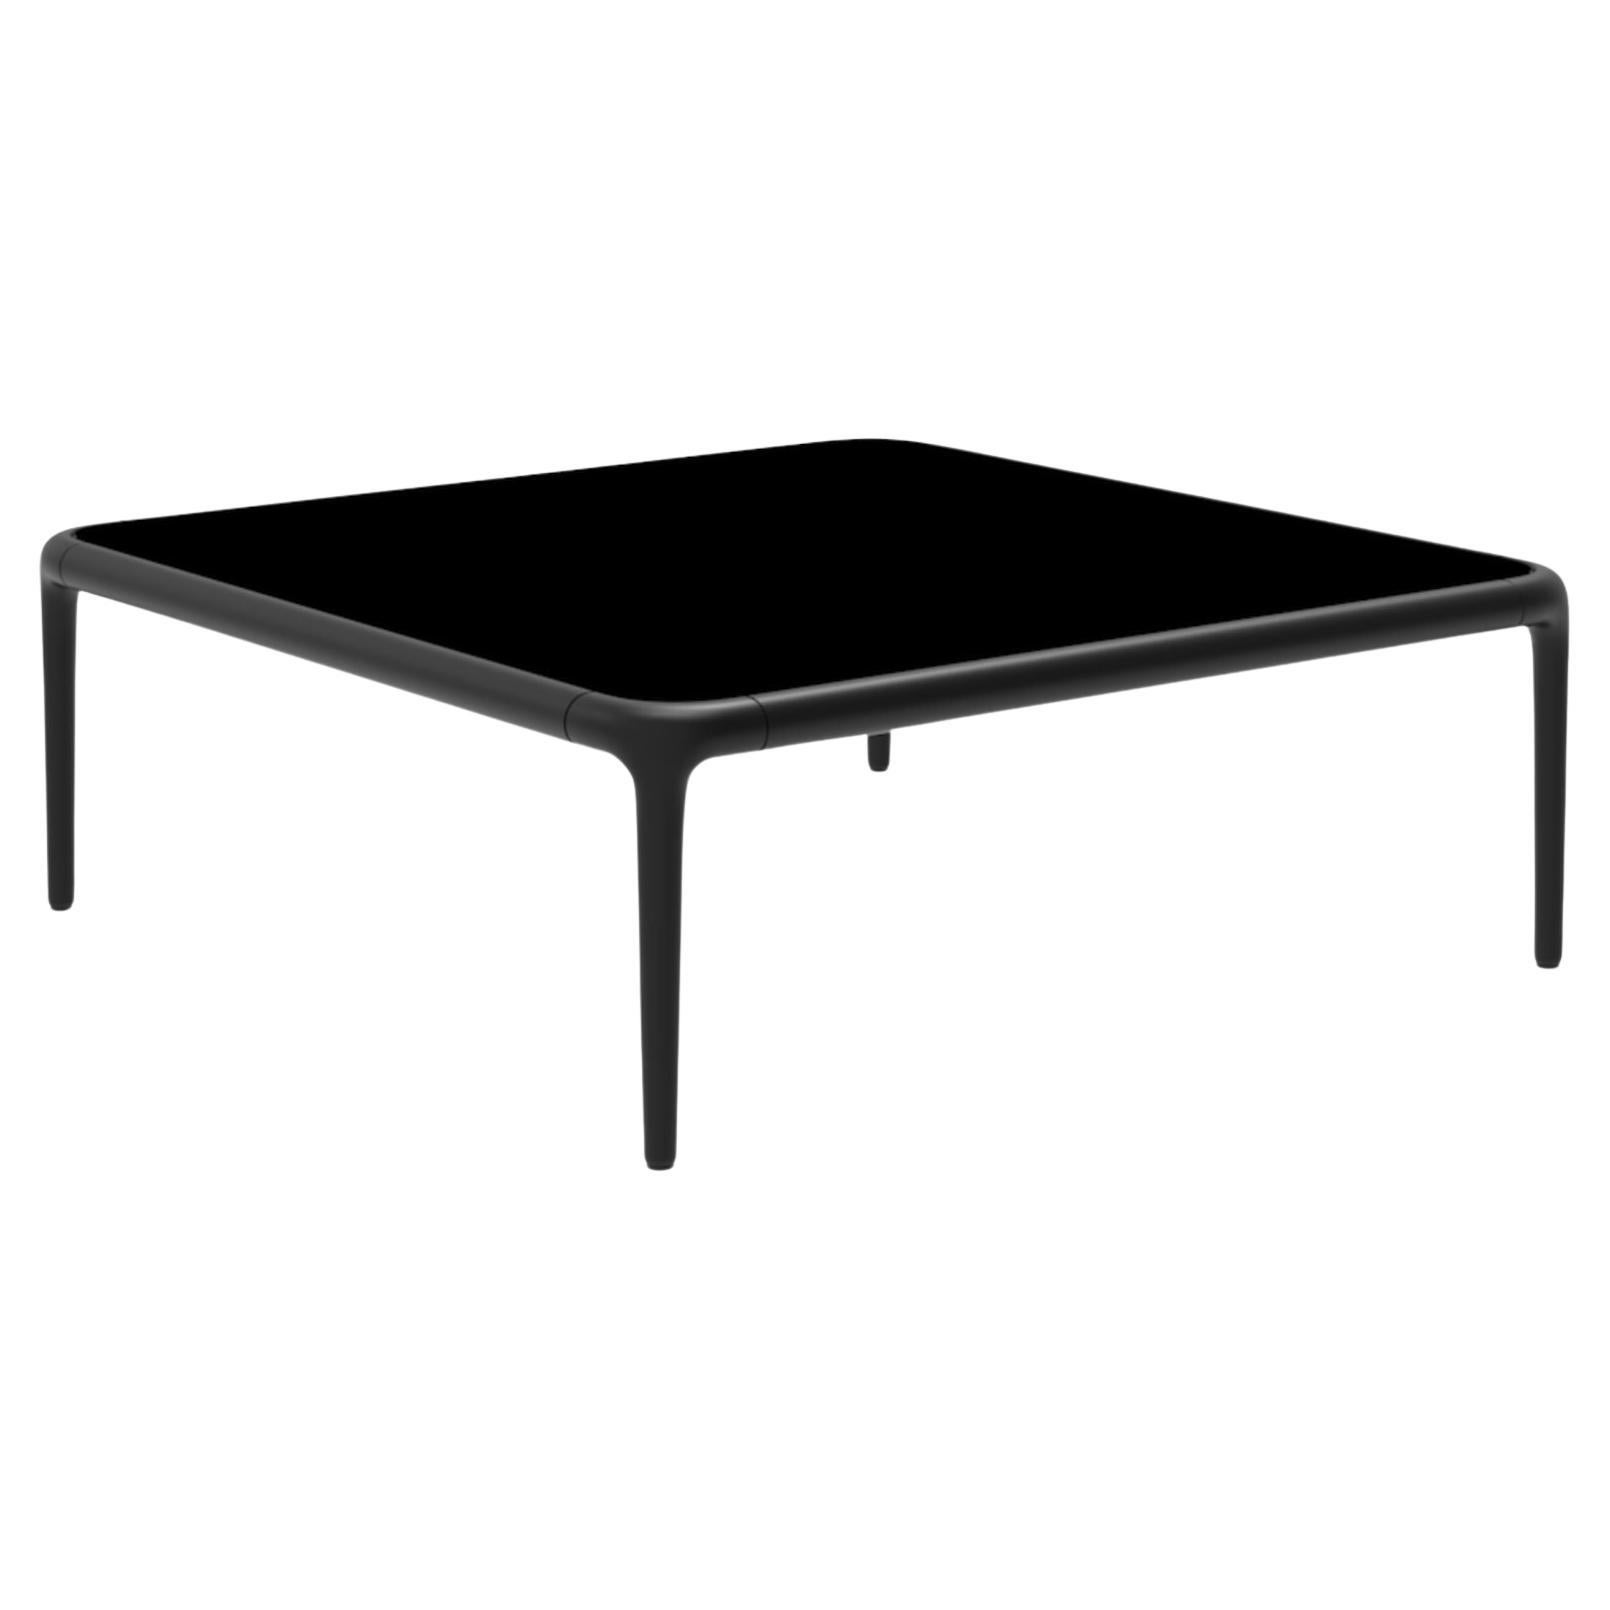 Xaloc Black Coffee Table 80 with Glass Top by Mowee For Sale